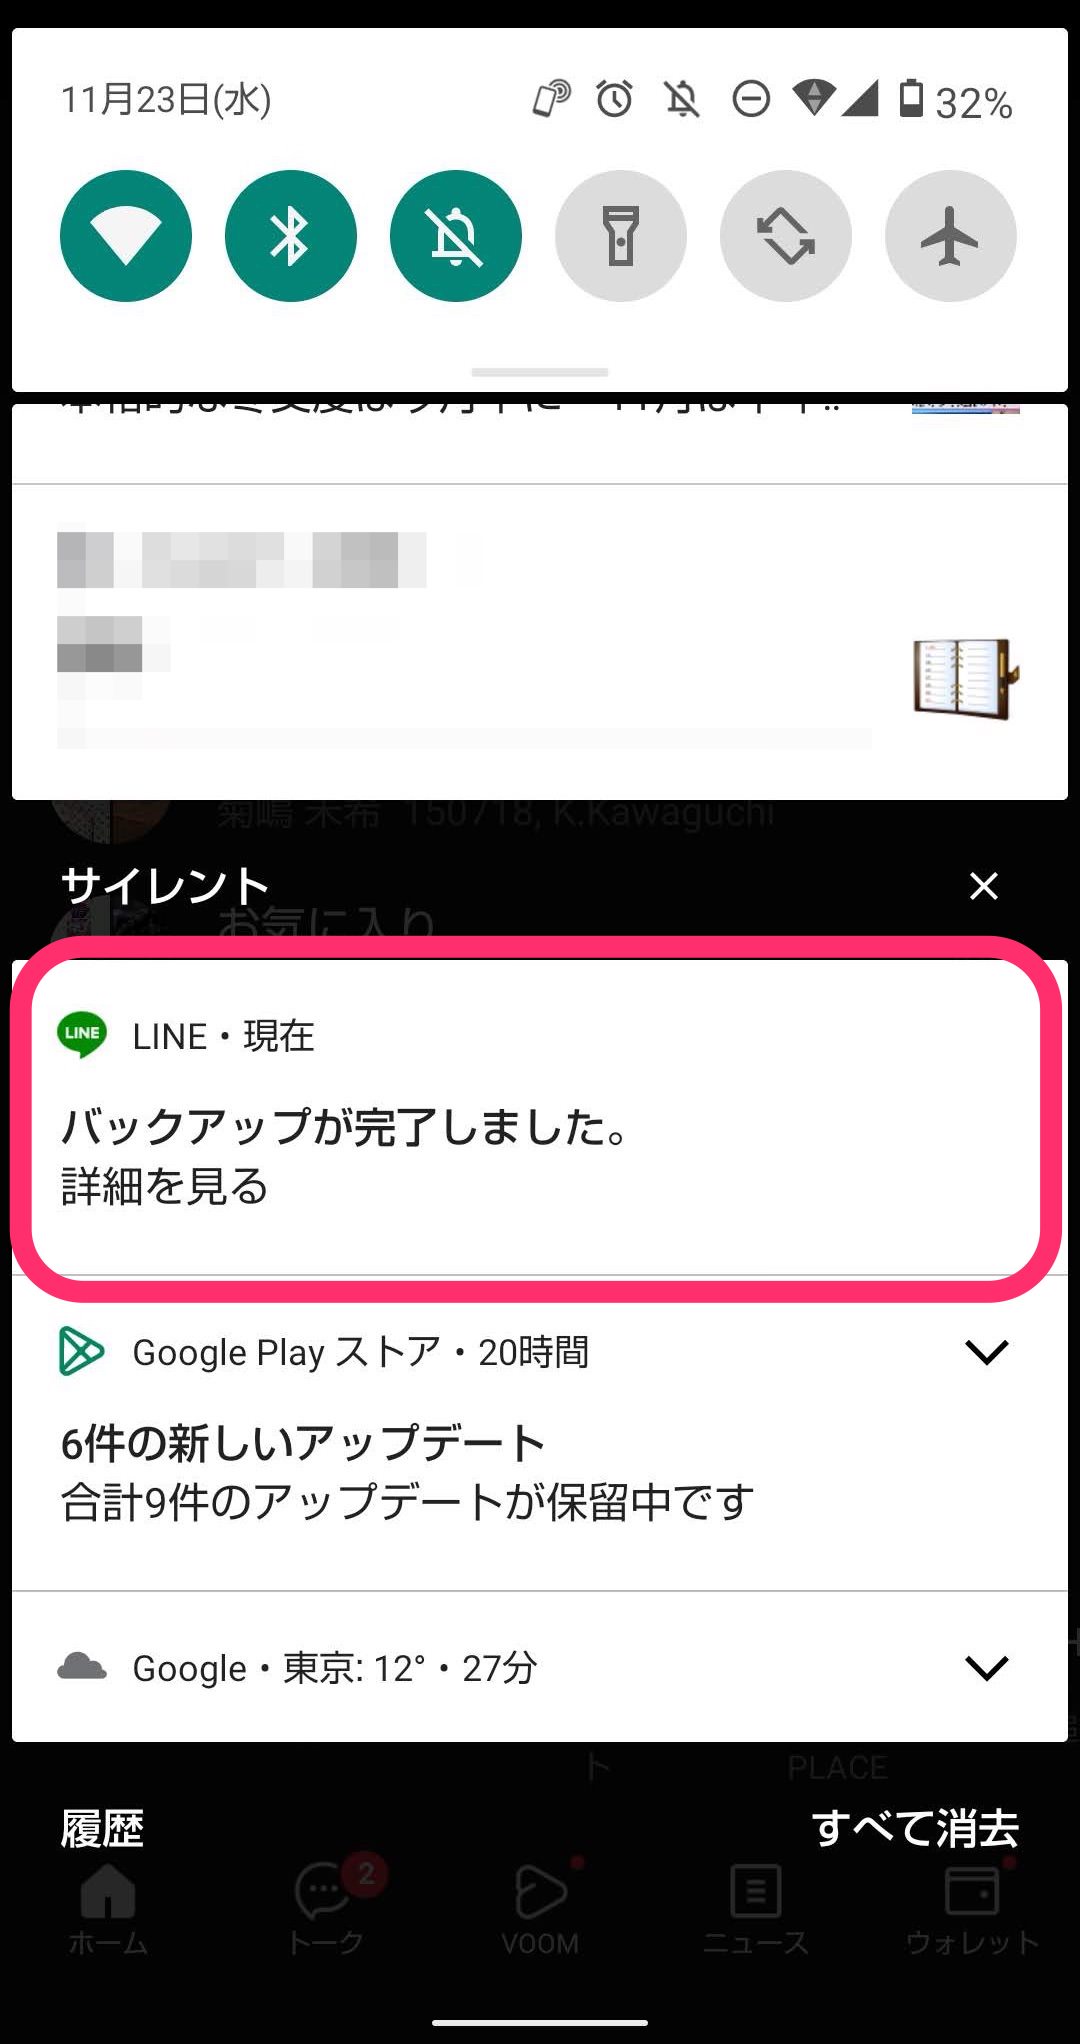 Android LINEアプリ　トーク履歴自動バックアップ完了通知